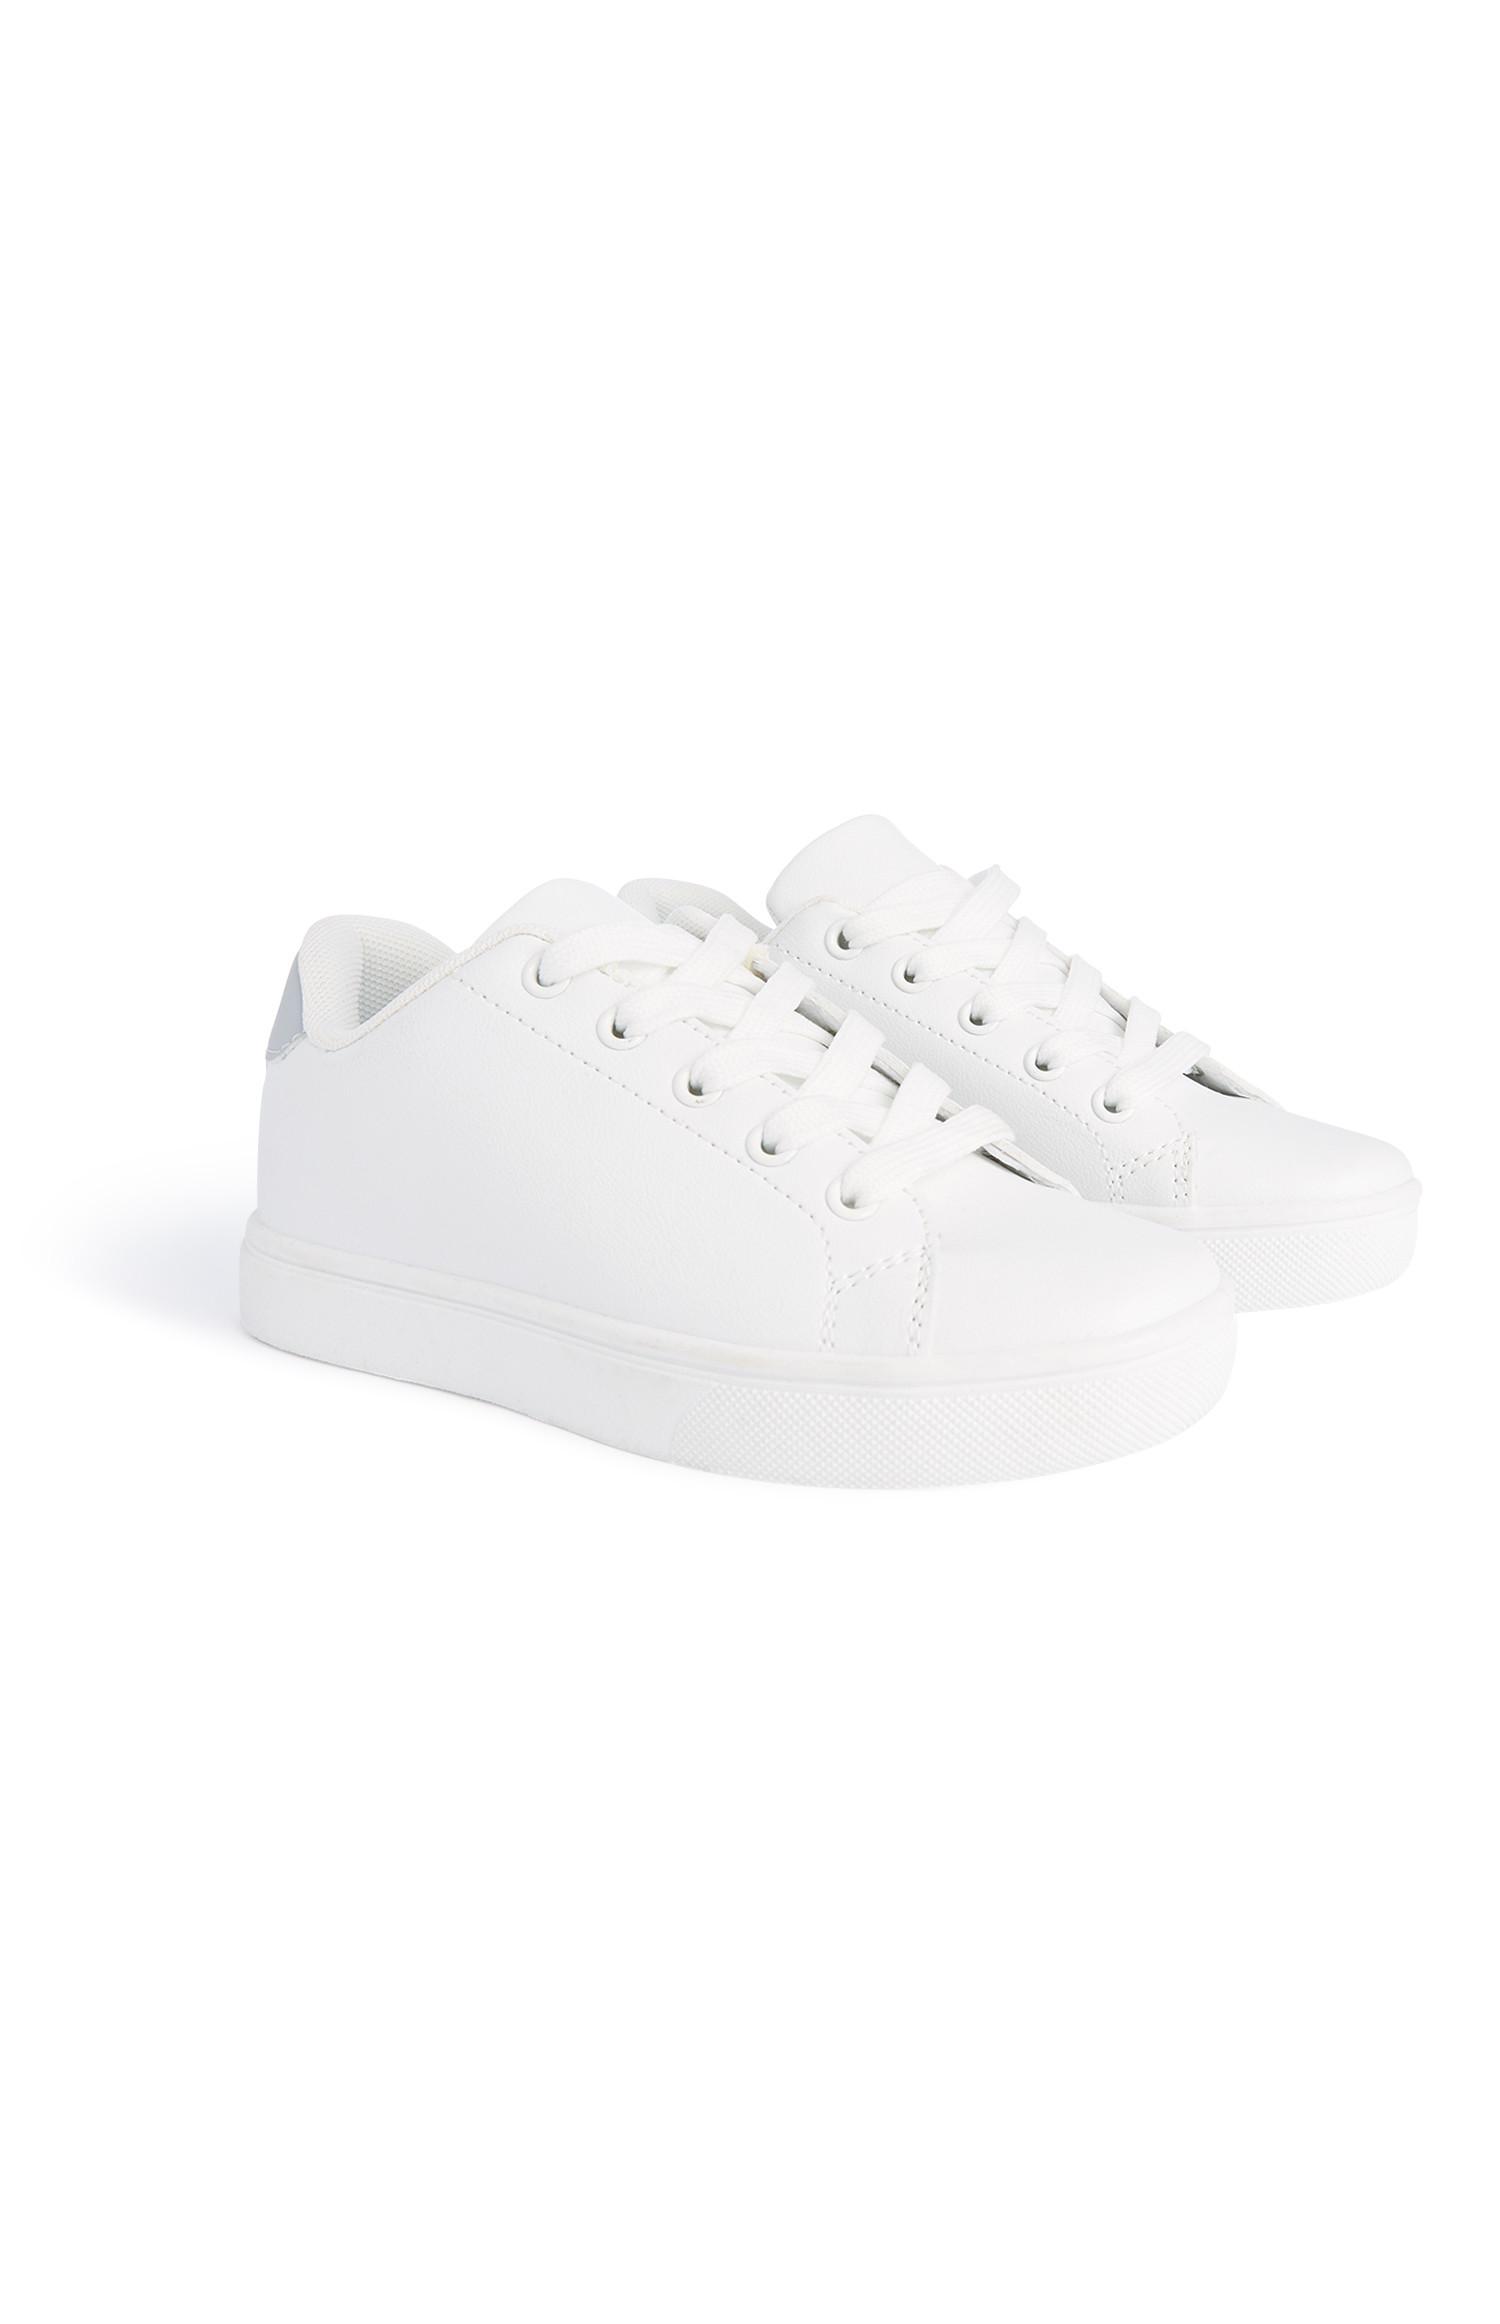 Older Boy Chunky White Trainer | Boys Shoes | Kids | Categories ...